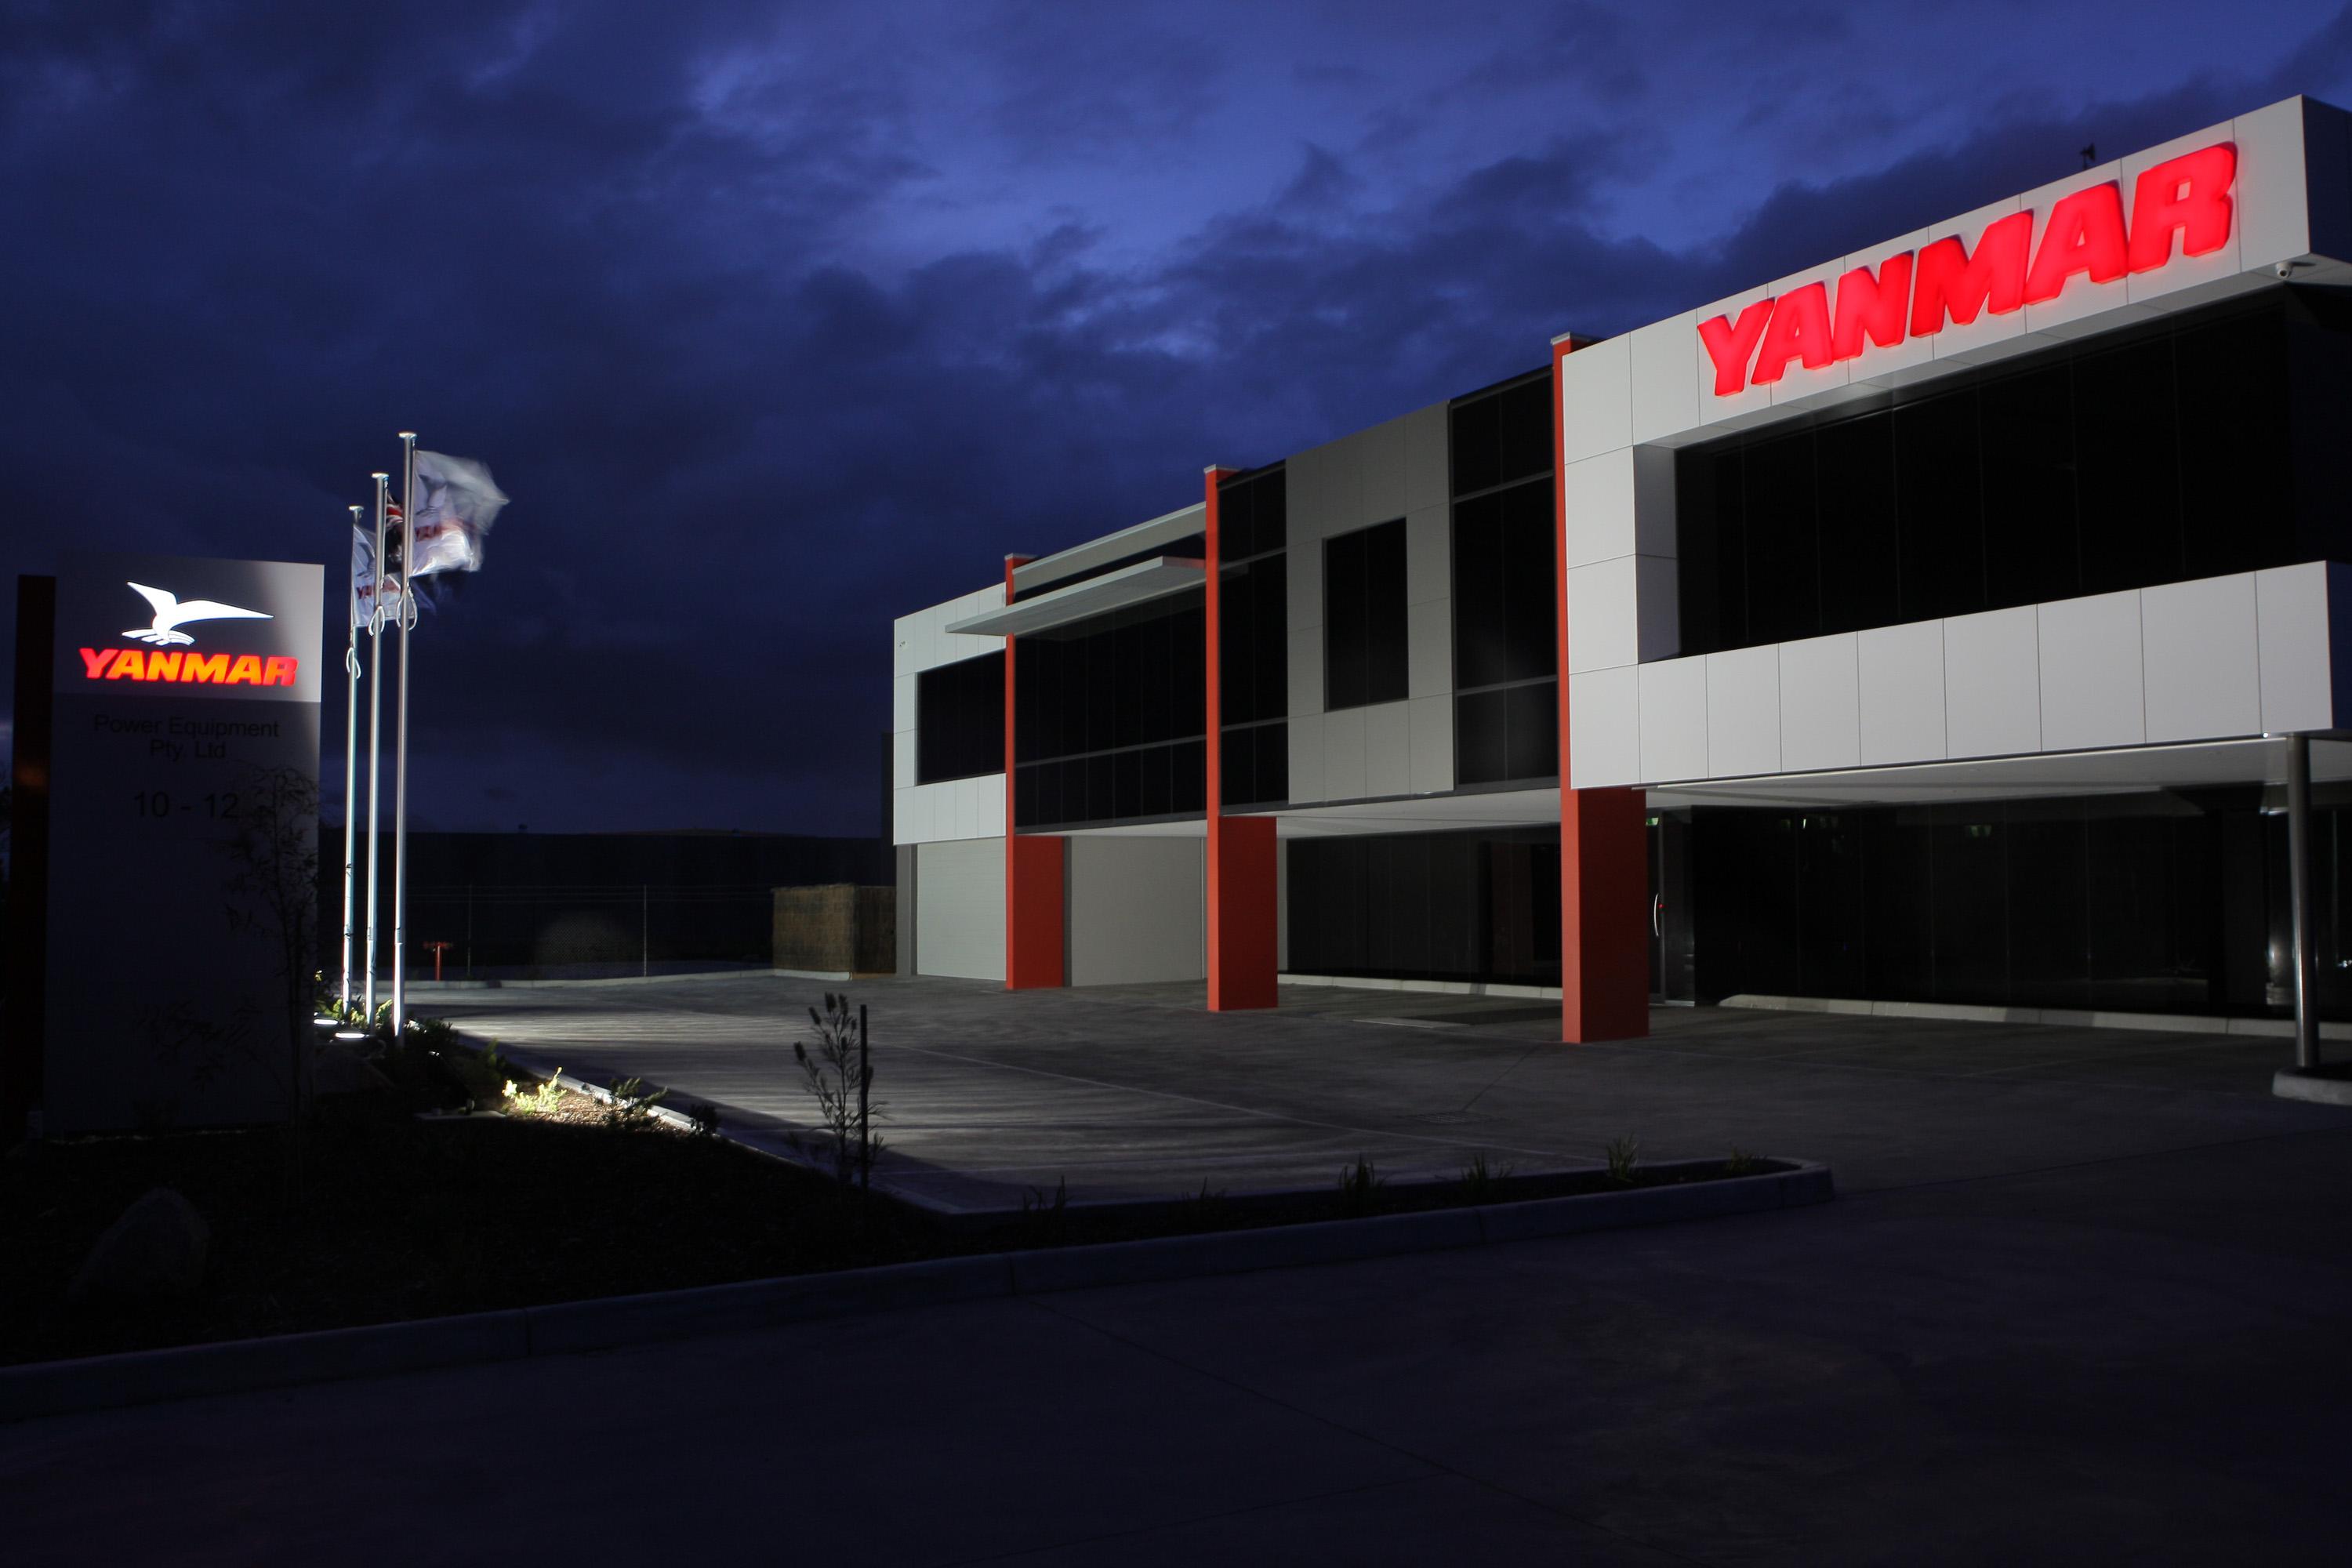 Power Equipment expands to NZ with Yanmar